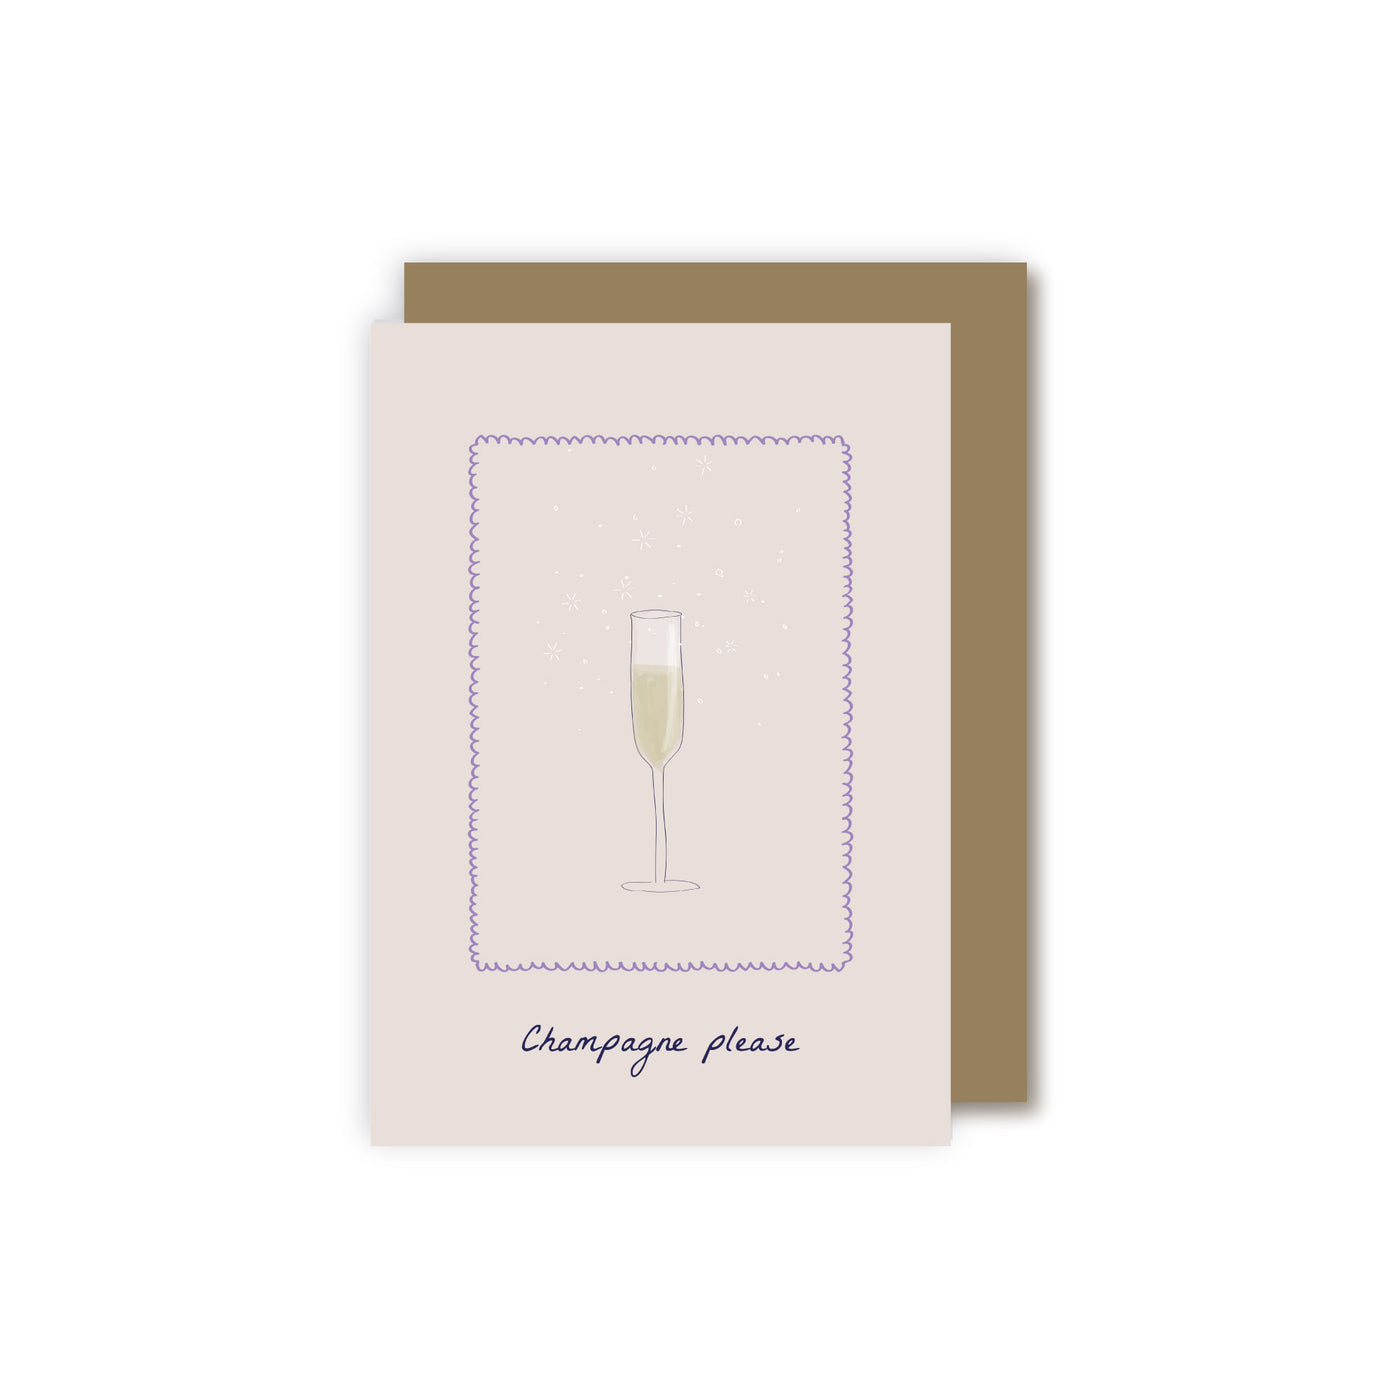 Champagne Please Greetings Card